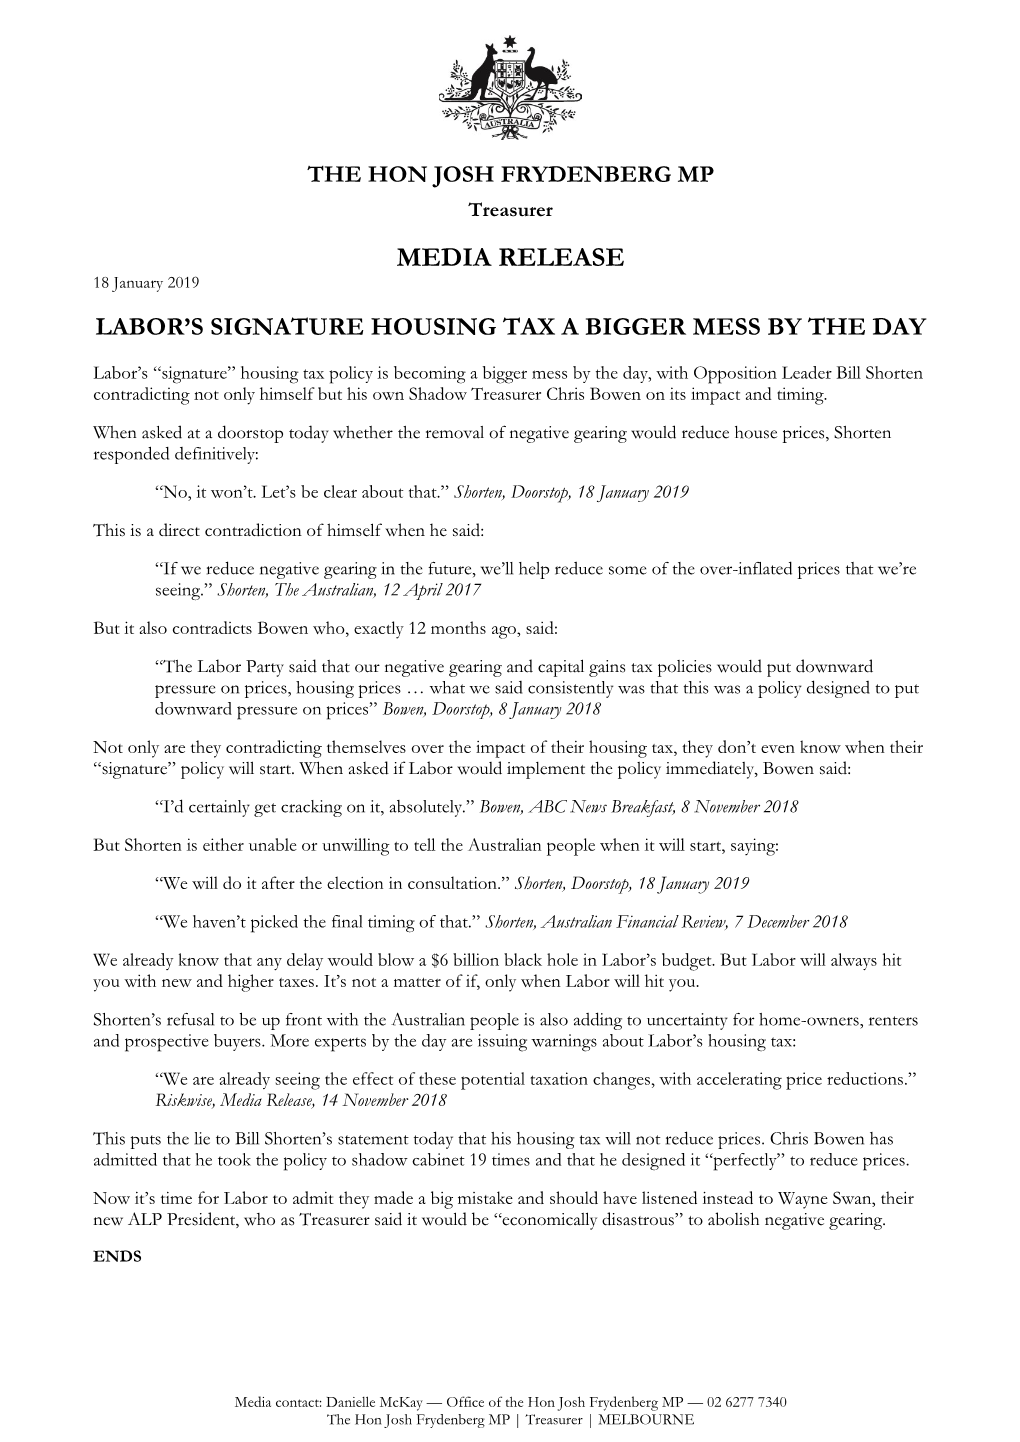 MEDIA RELEASE 18 January 2019 LABOR’S SIGNATURE HOUSING TAX a BIGGER MESS by the DAY